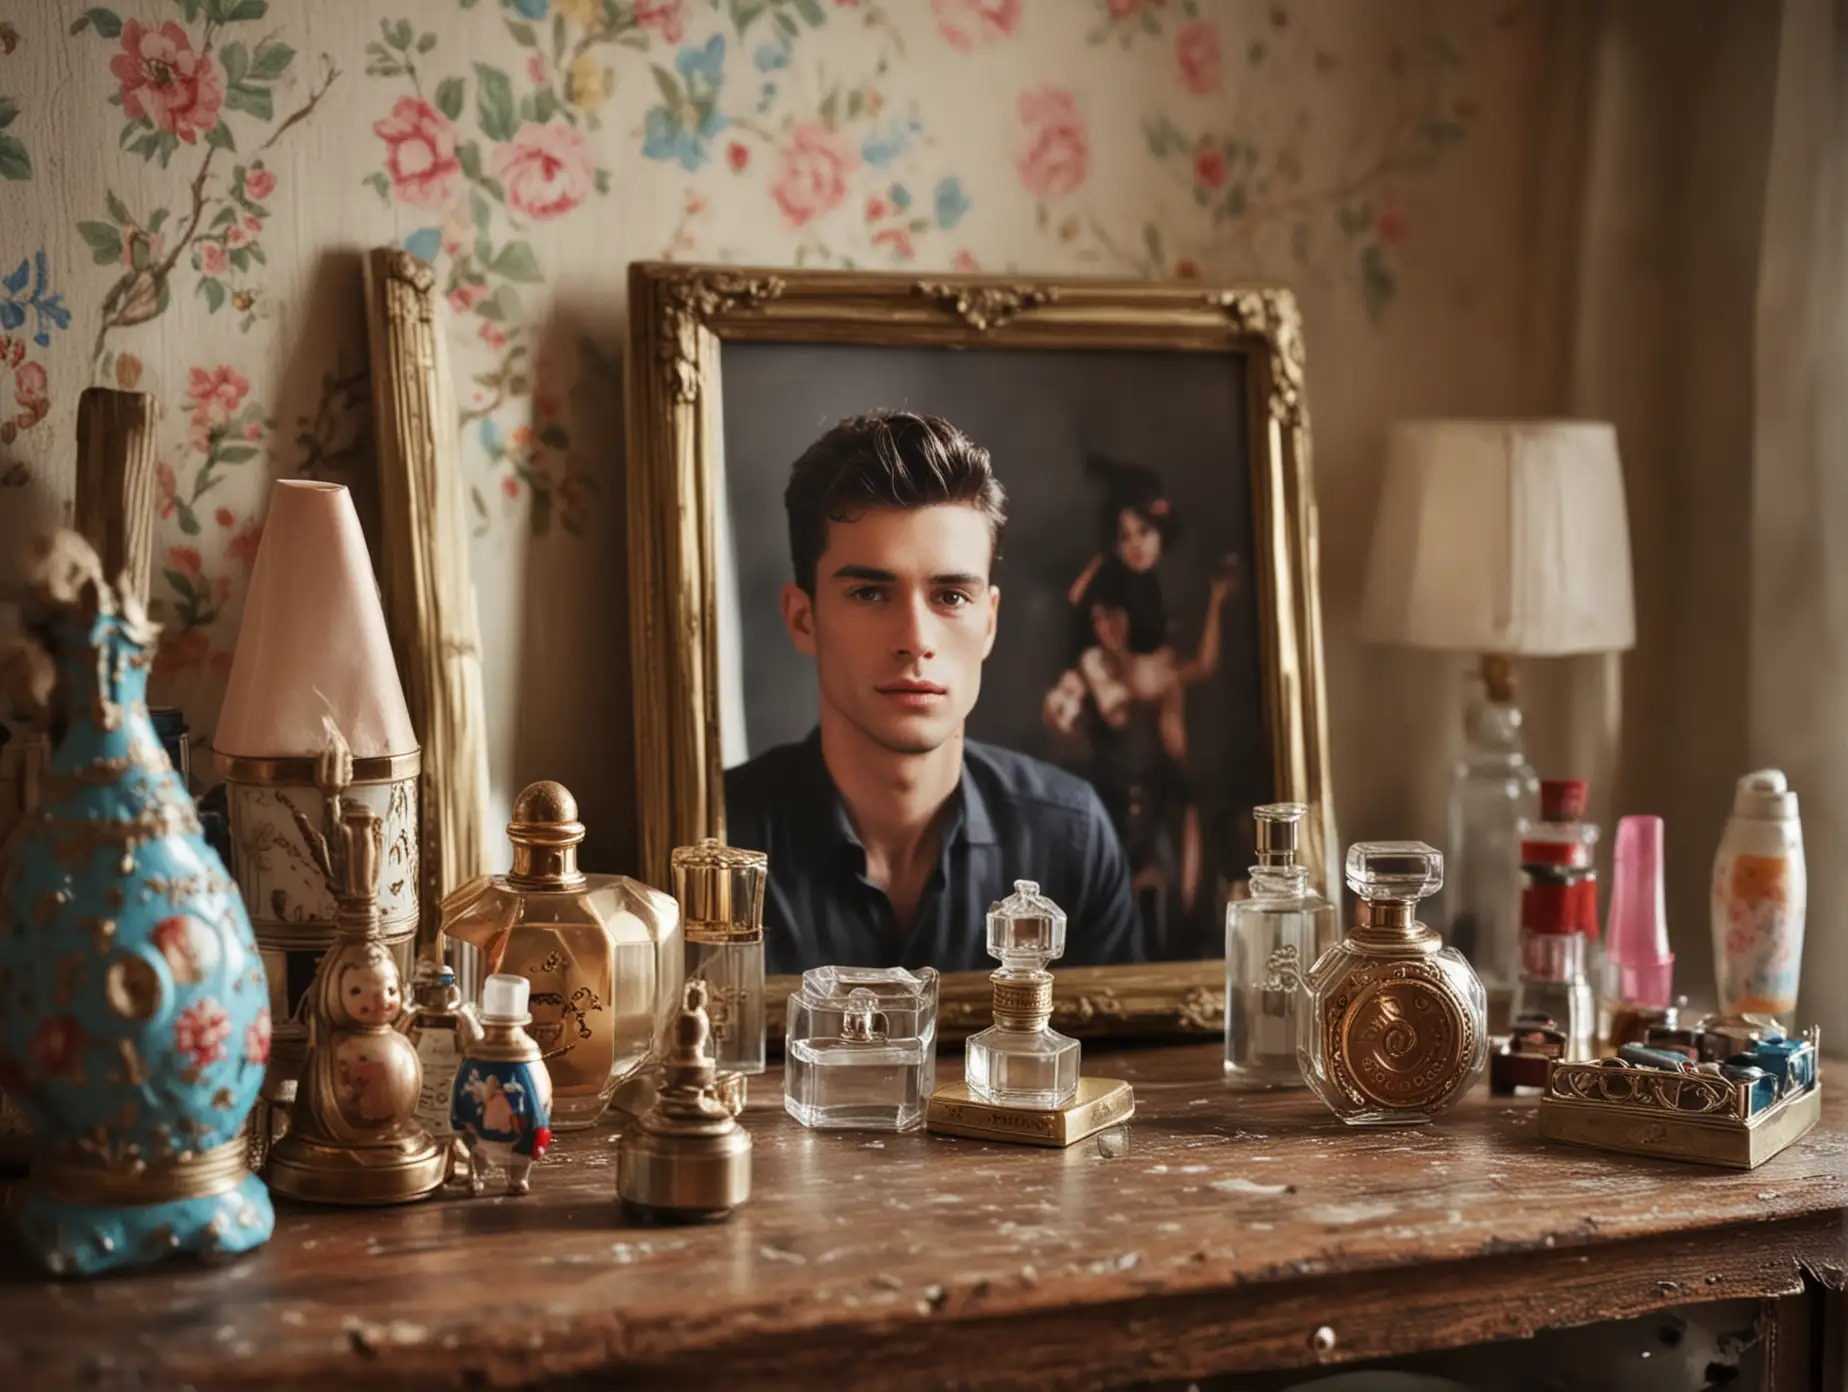 Photograph-of-a-Handsome-Guy-Among-Toys-and-Perfumes-in-a-Small-Bedroom